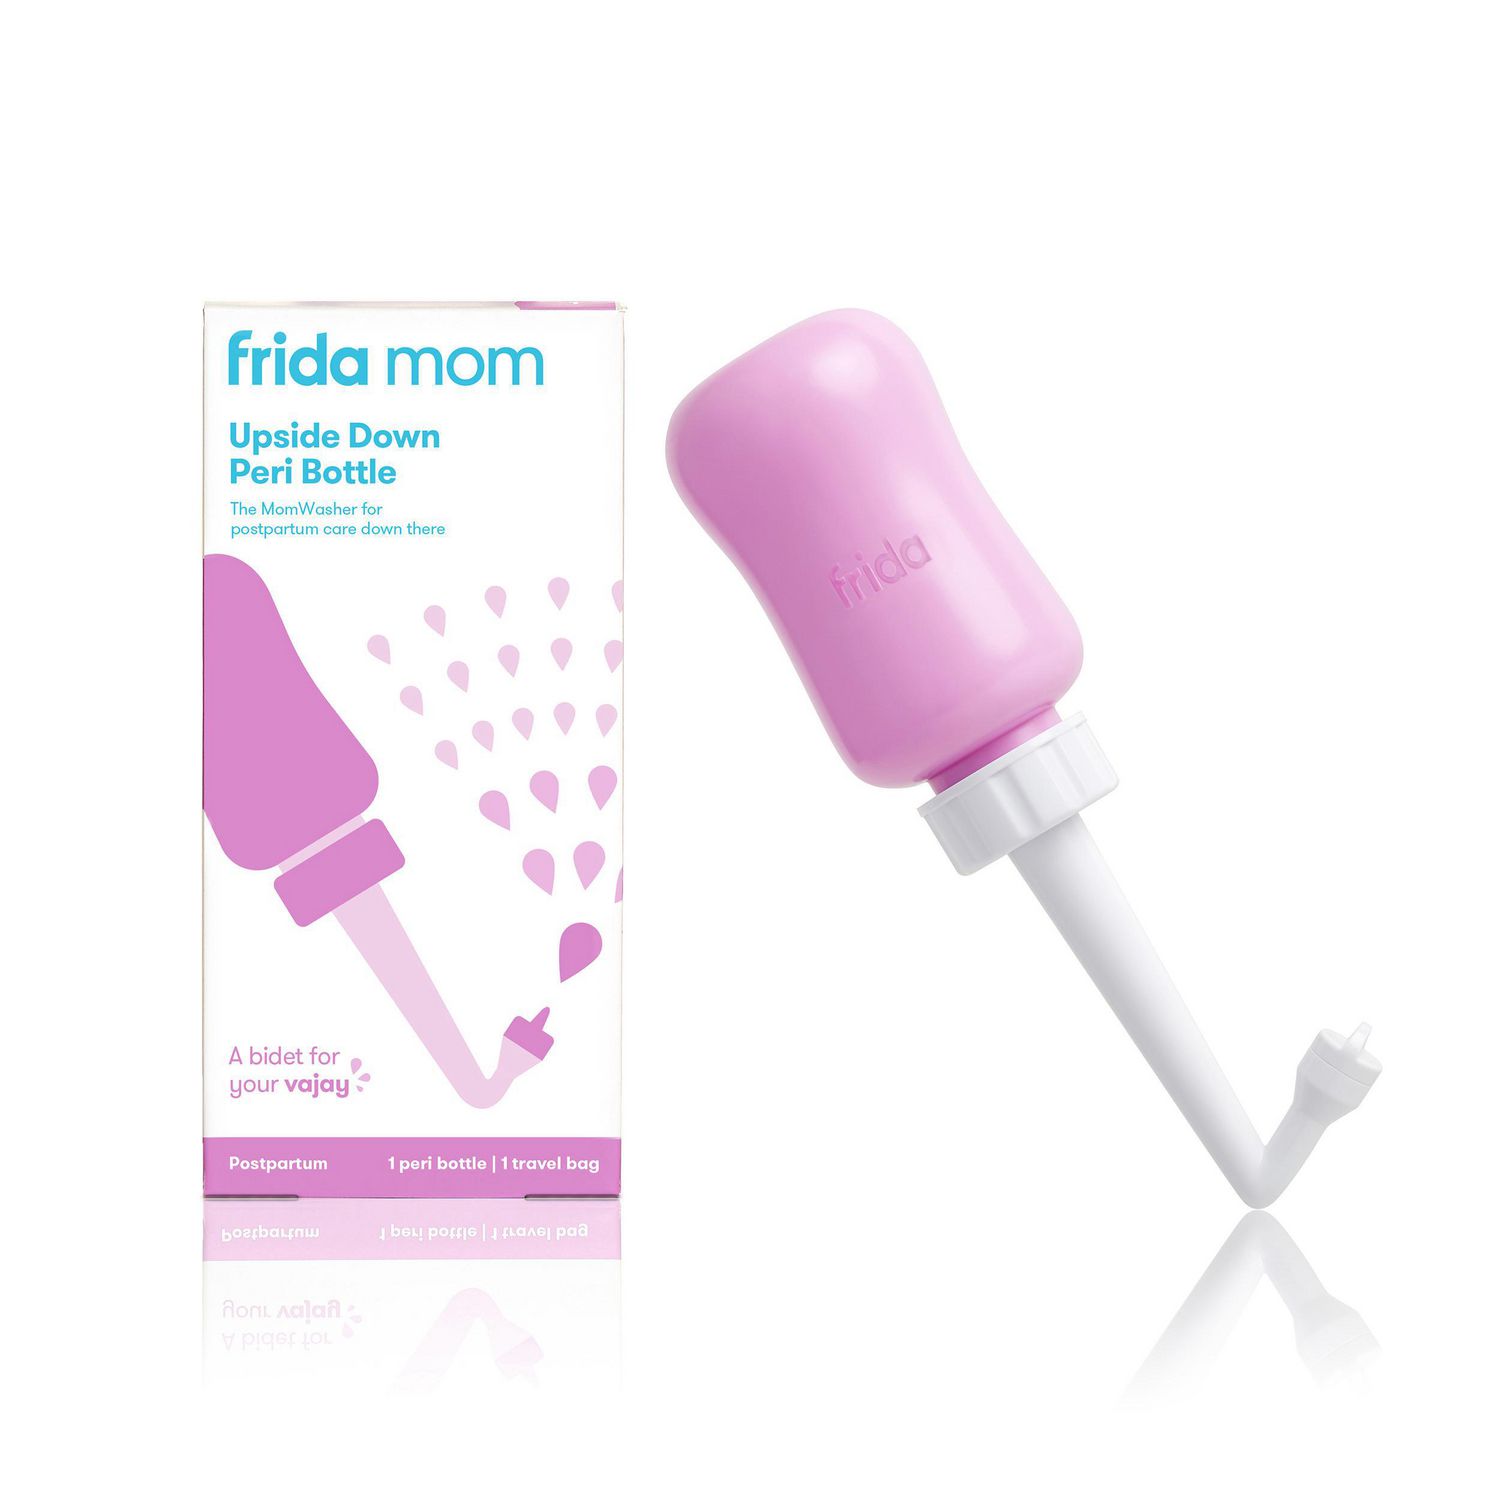 Ninja Mama Peri Bottle for Postpartum Care. Post Partum Essentials for Pain  Relief, Tears & Hemorrhoids After Birth. Large Portable Perineal Bottle